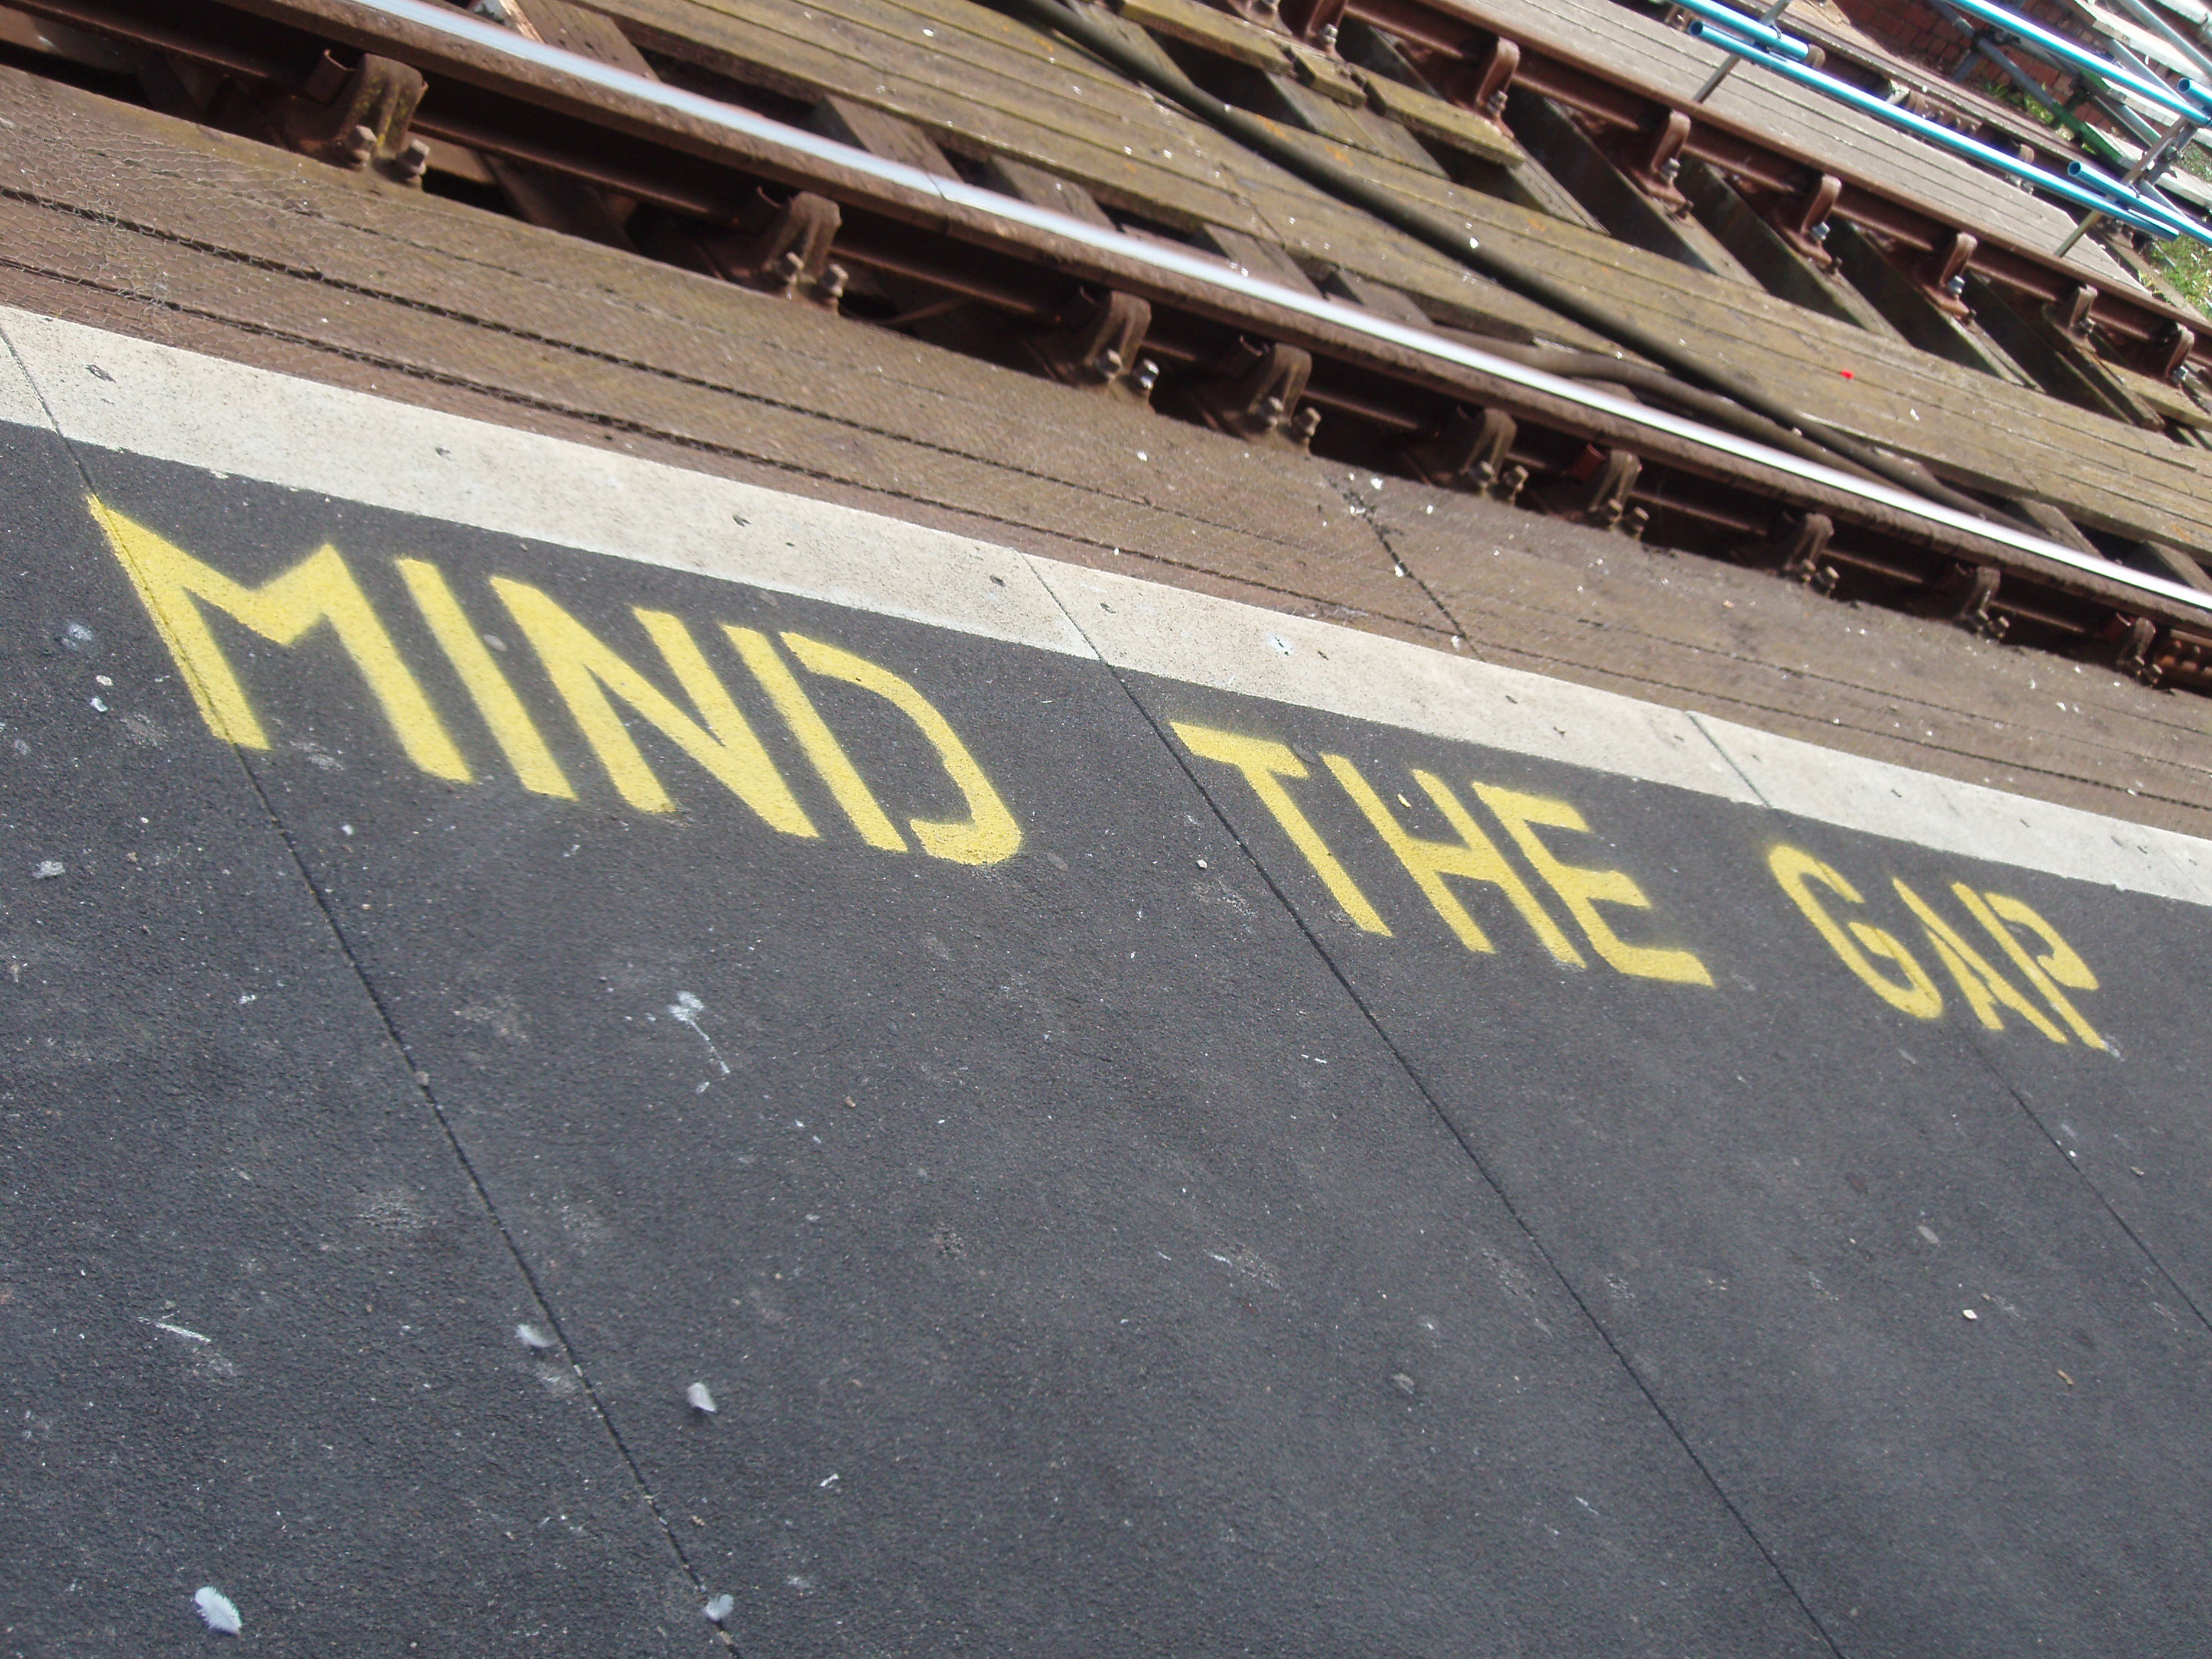 Railroad tracks with a sign reading "mind the gap" to warn passengers boarding the train.